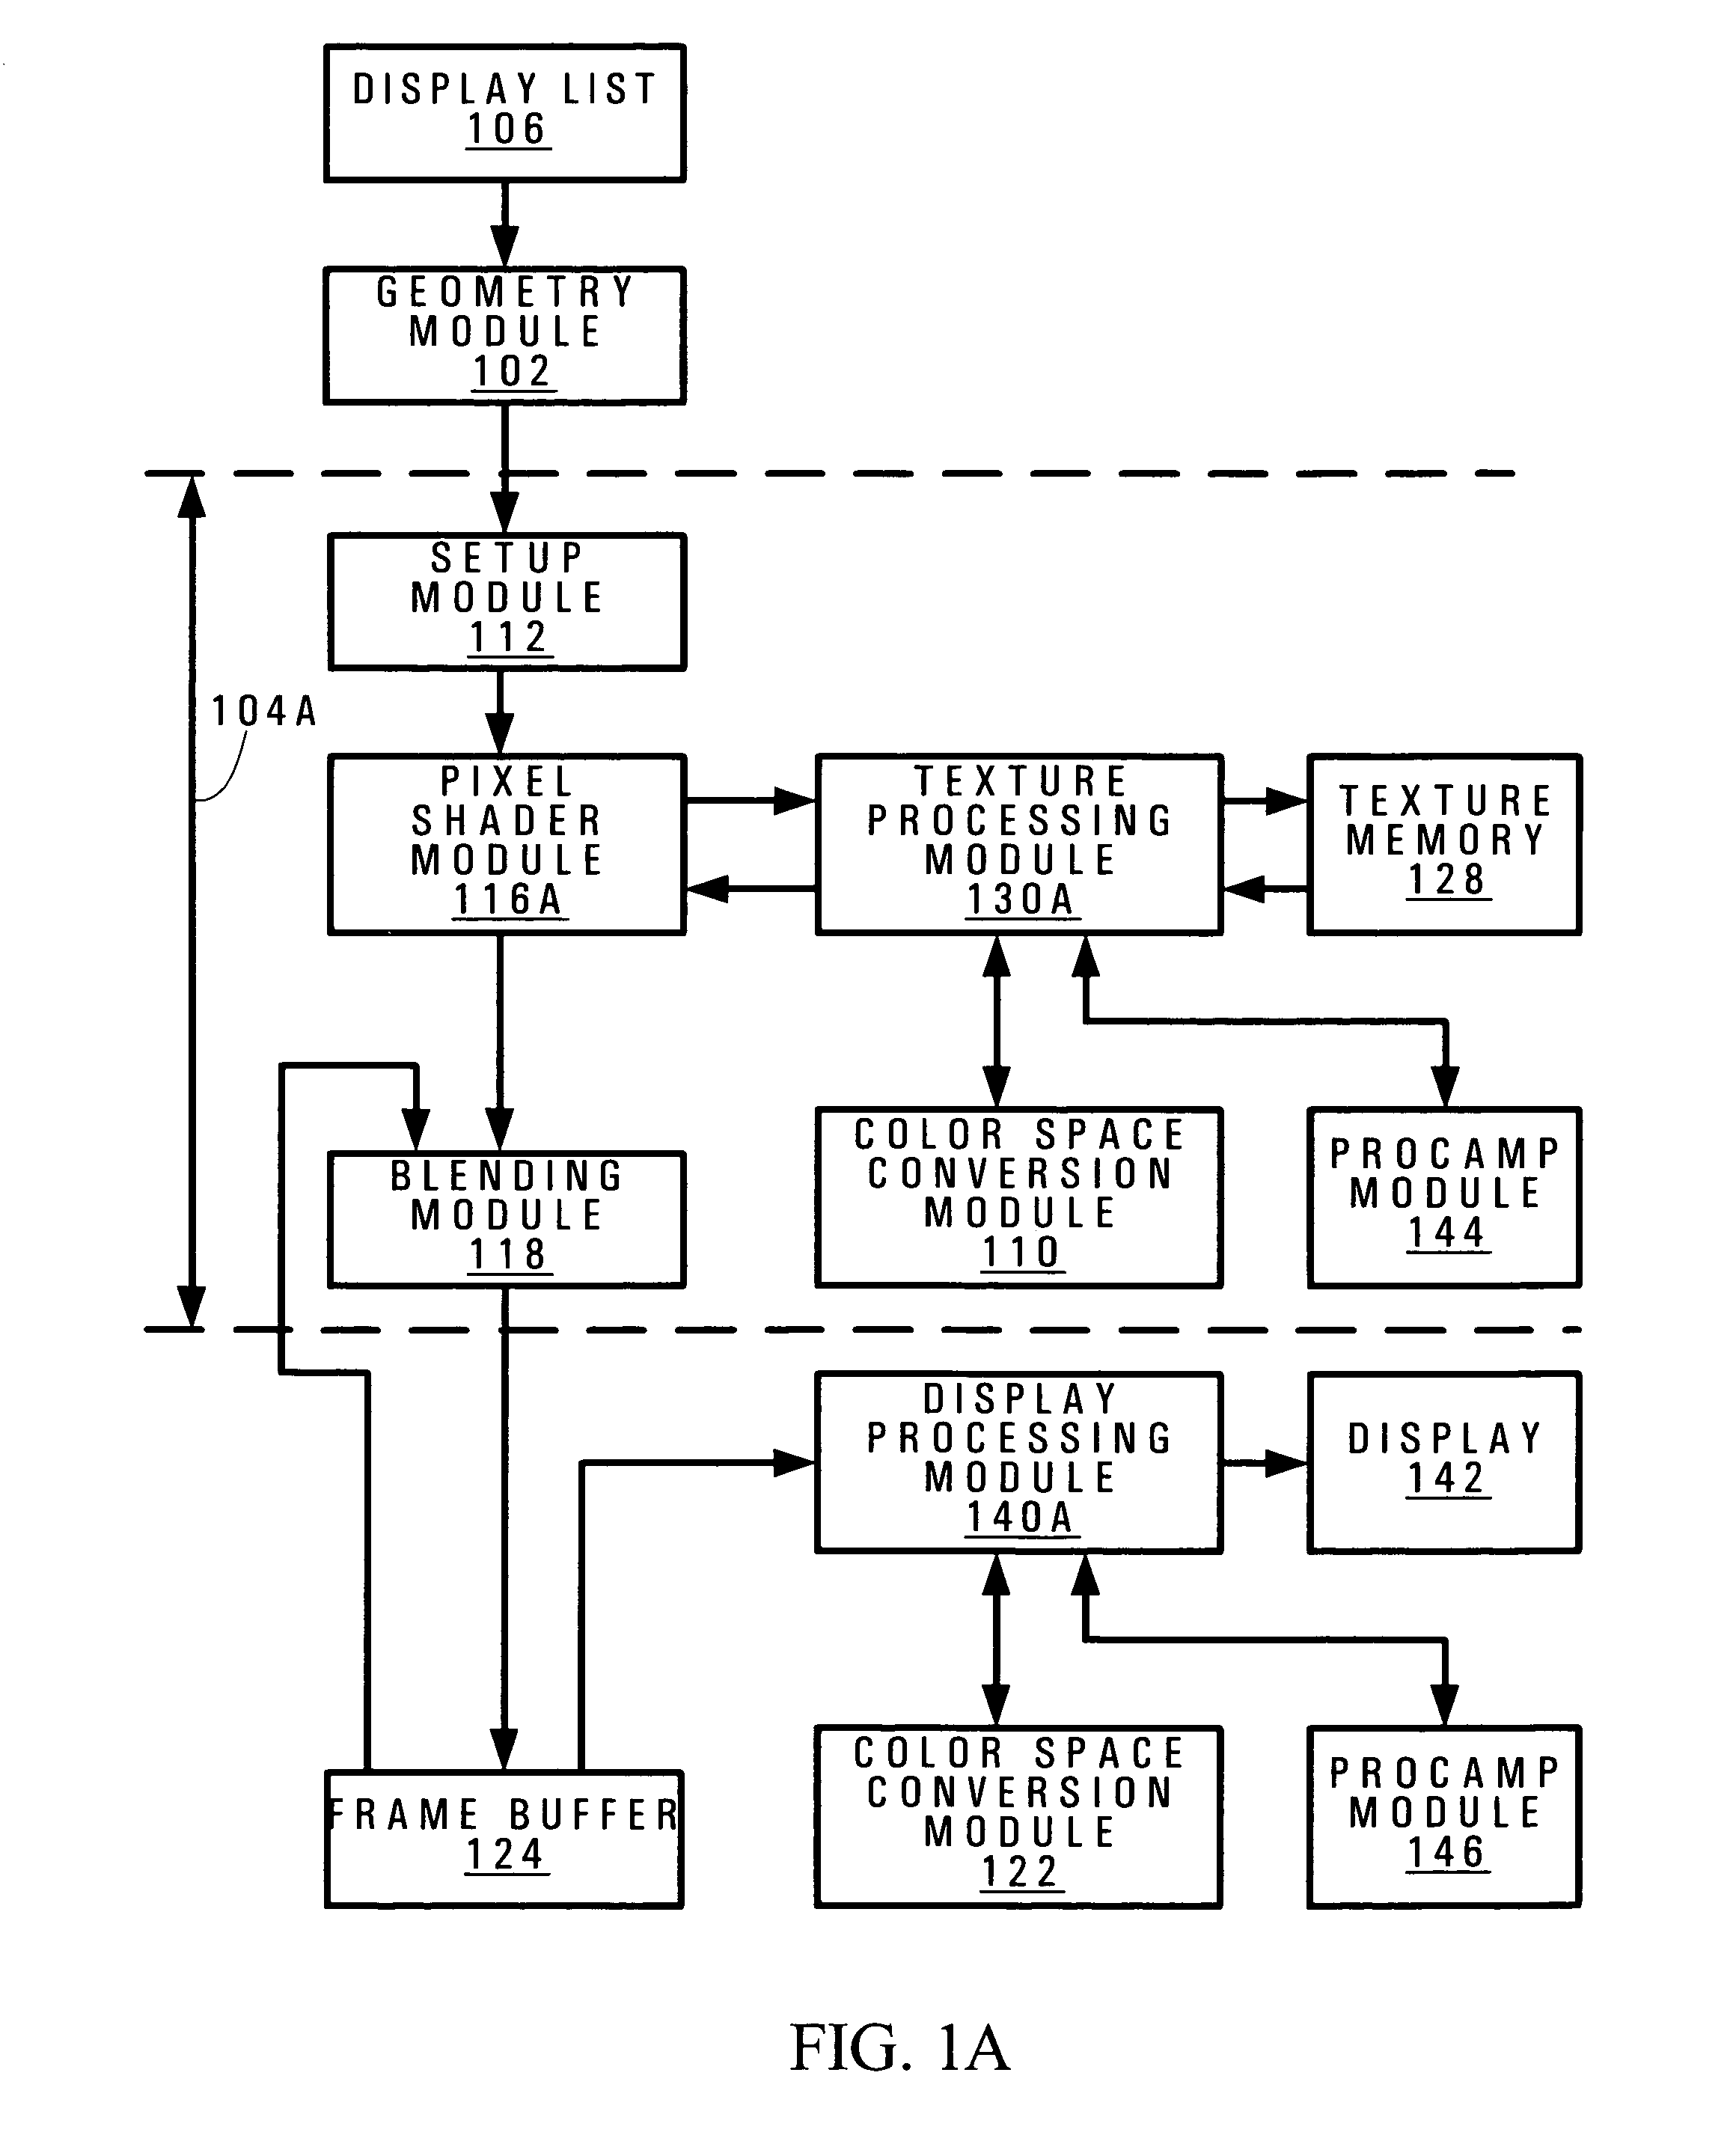 Efficient execution of color space processing functions in a graphics processing unit